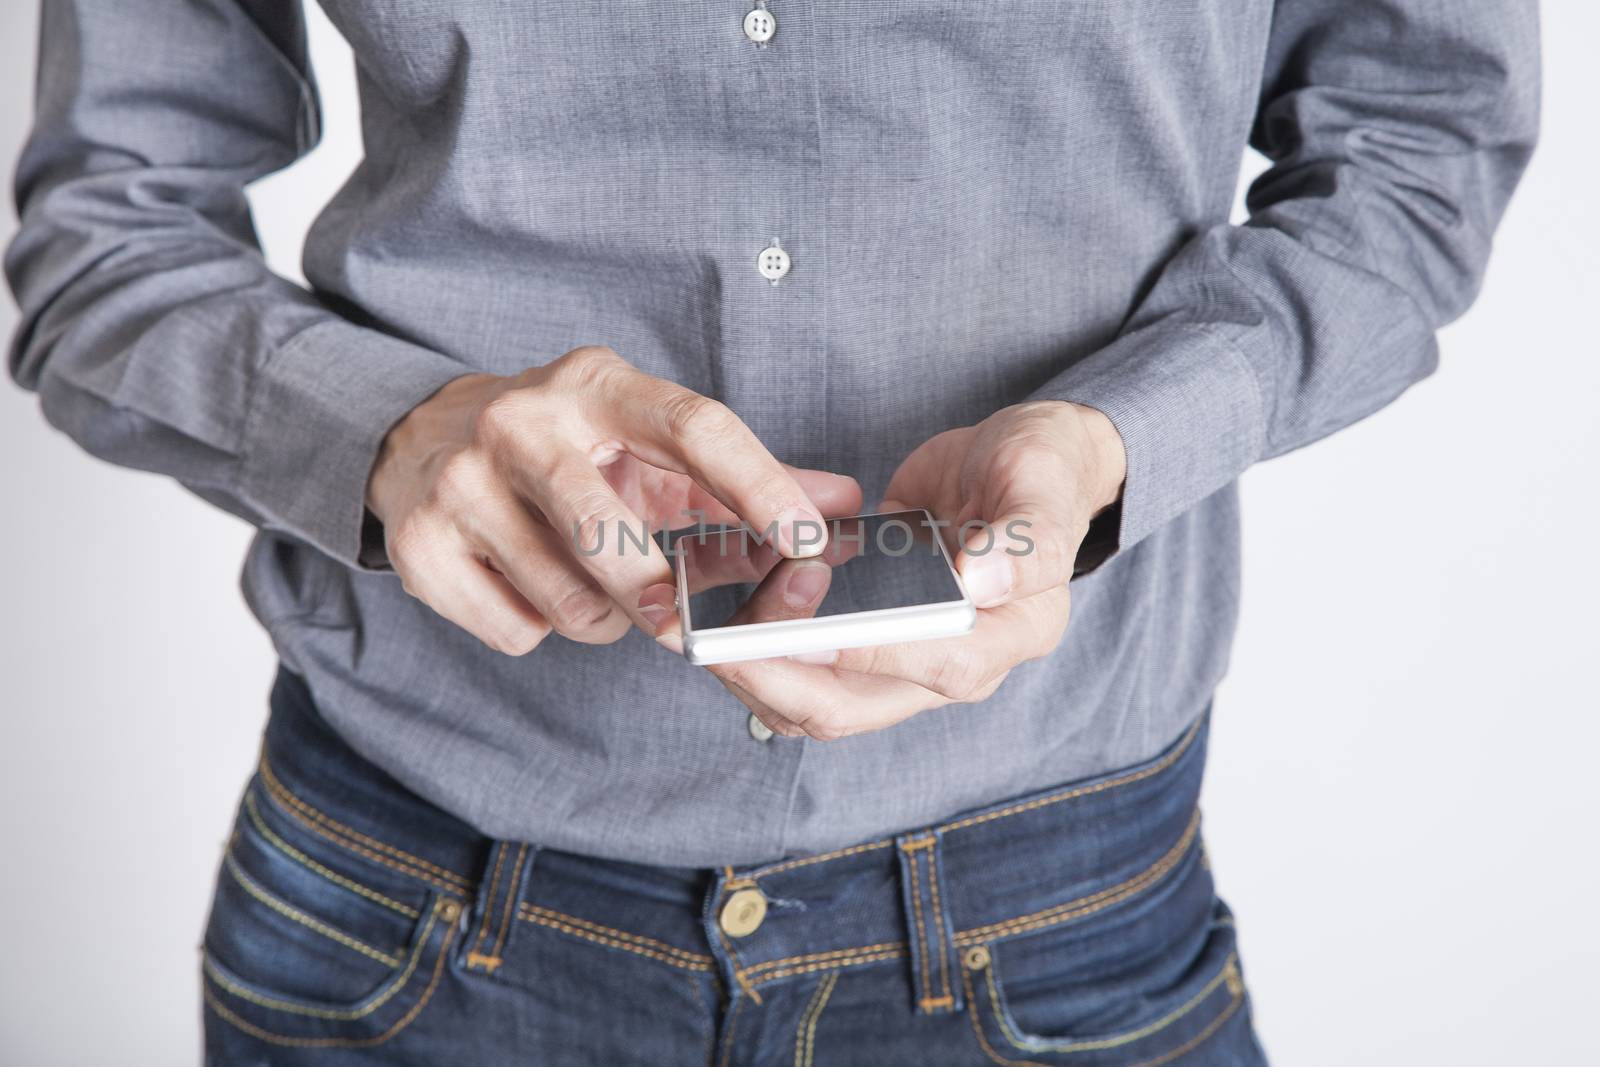 woman blue jeans trousers and grey shirt with mobile phone smartphone blank screen in her hand isolated over white background